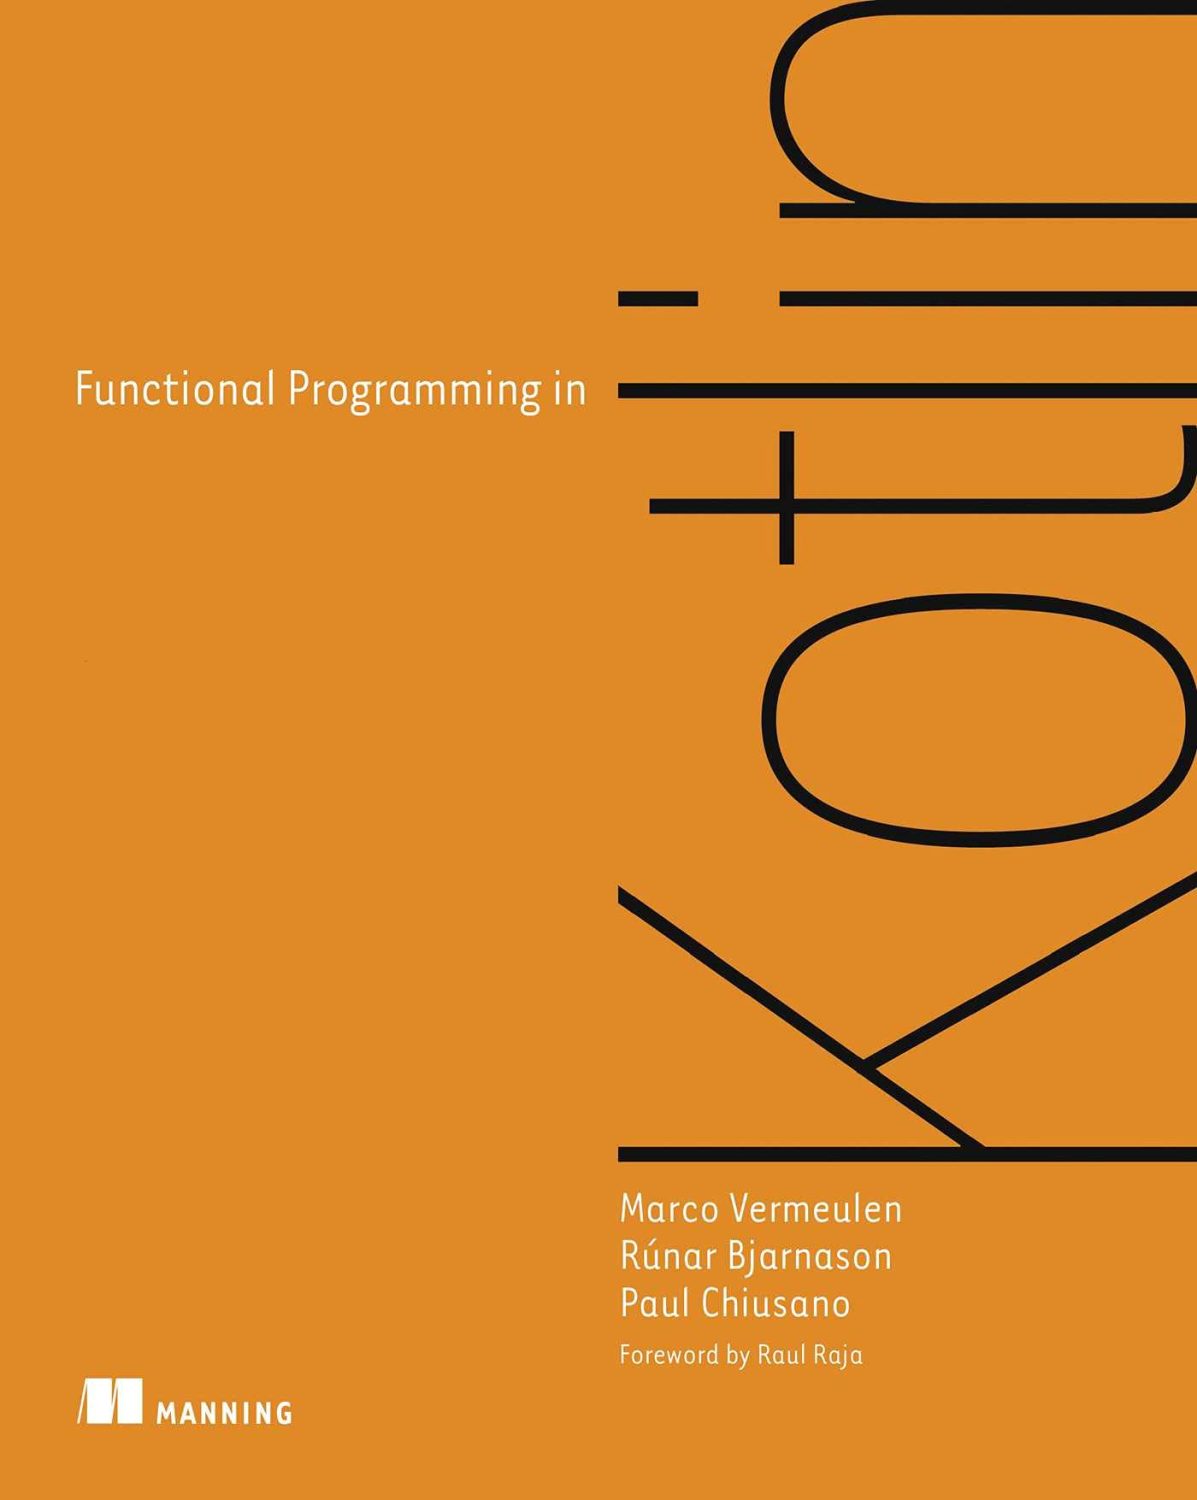 17 Best Courses/Resources to Learn Kotlin Programming Career Development 